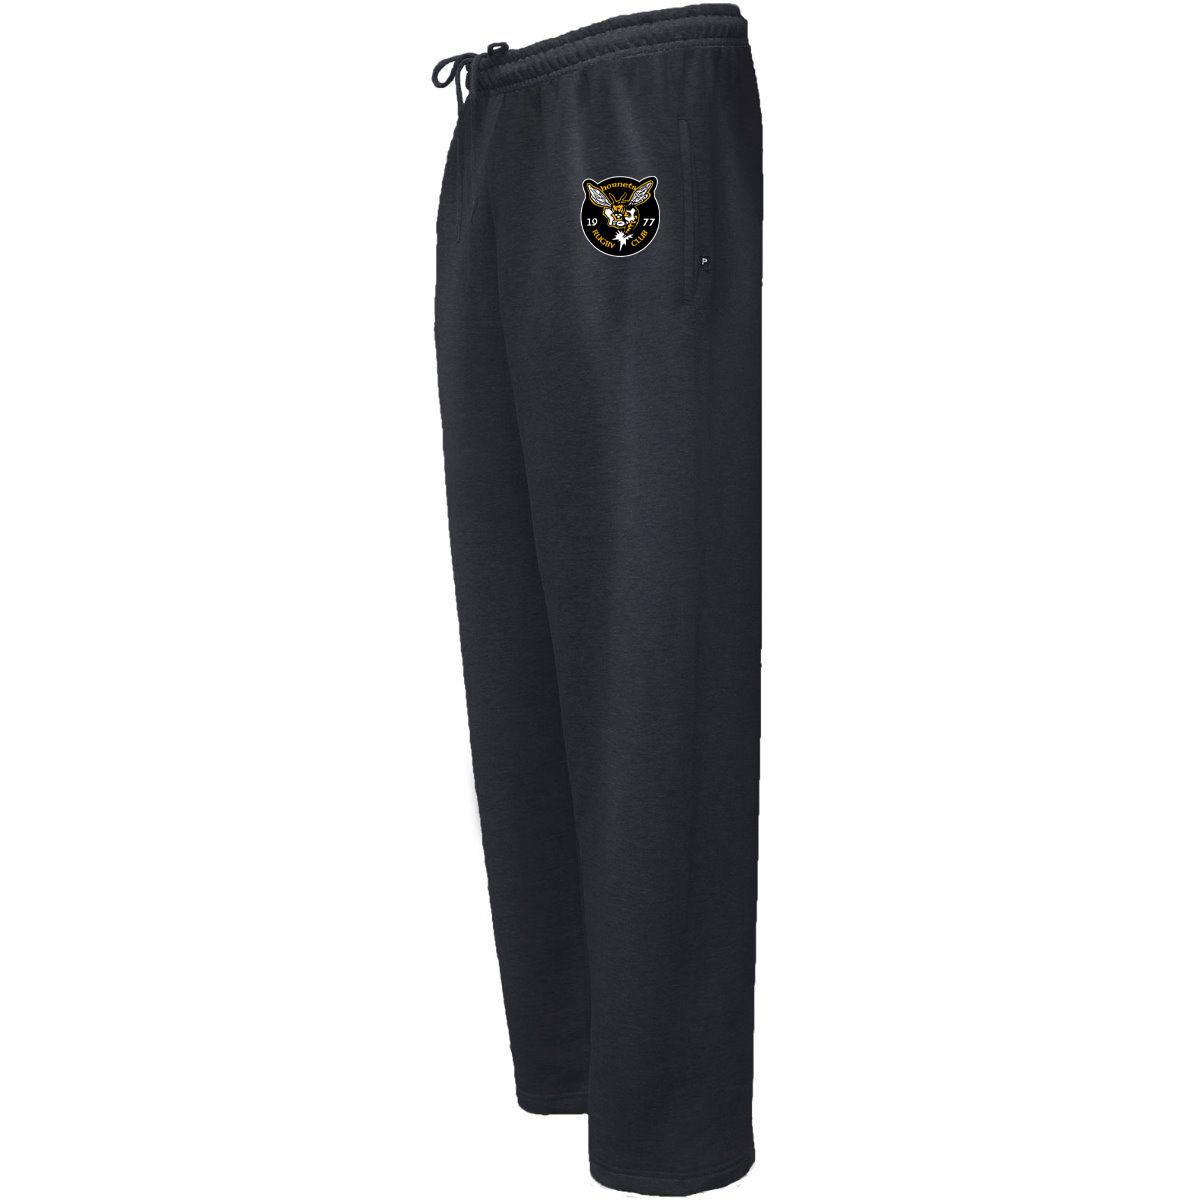 St. Louis Hornets Rugby Club Sweatpants